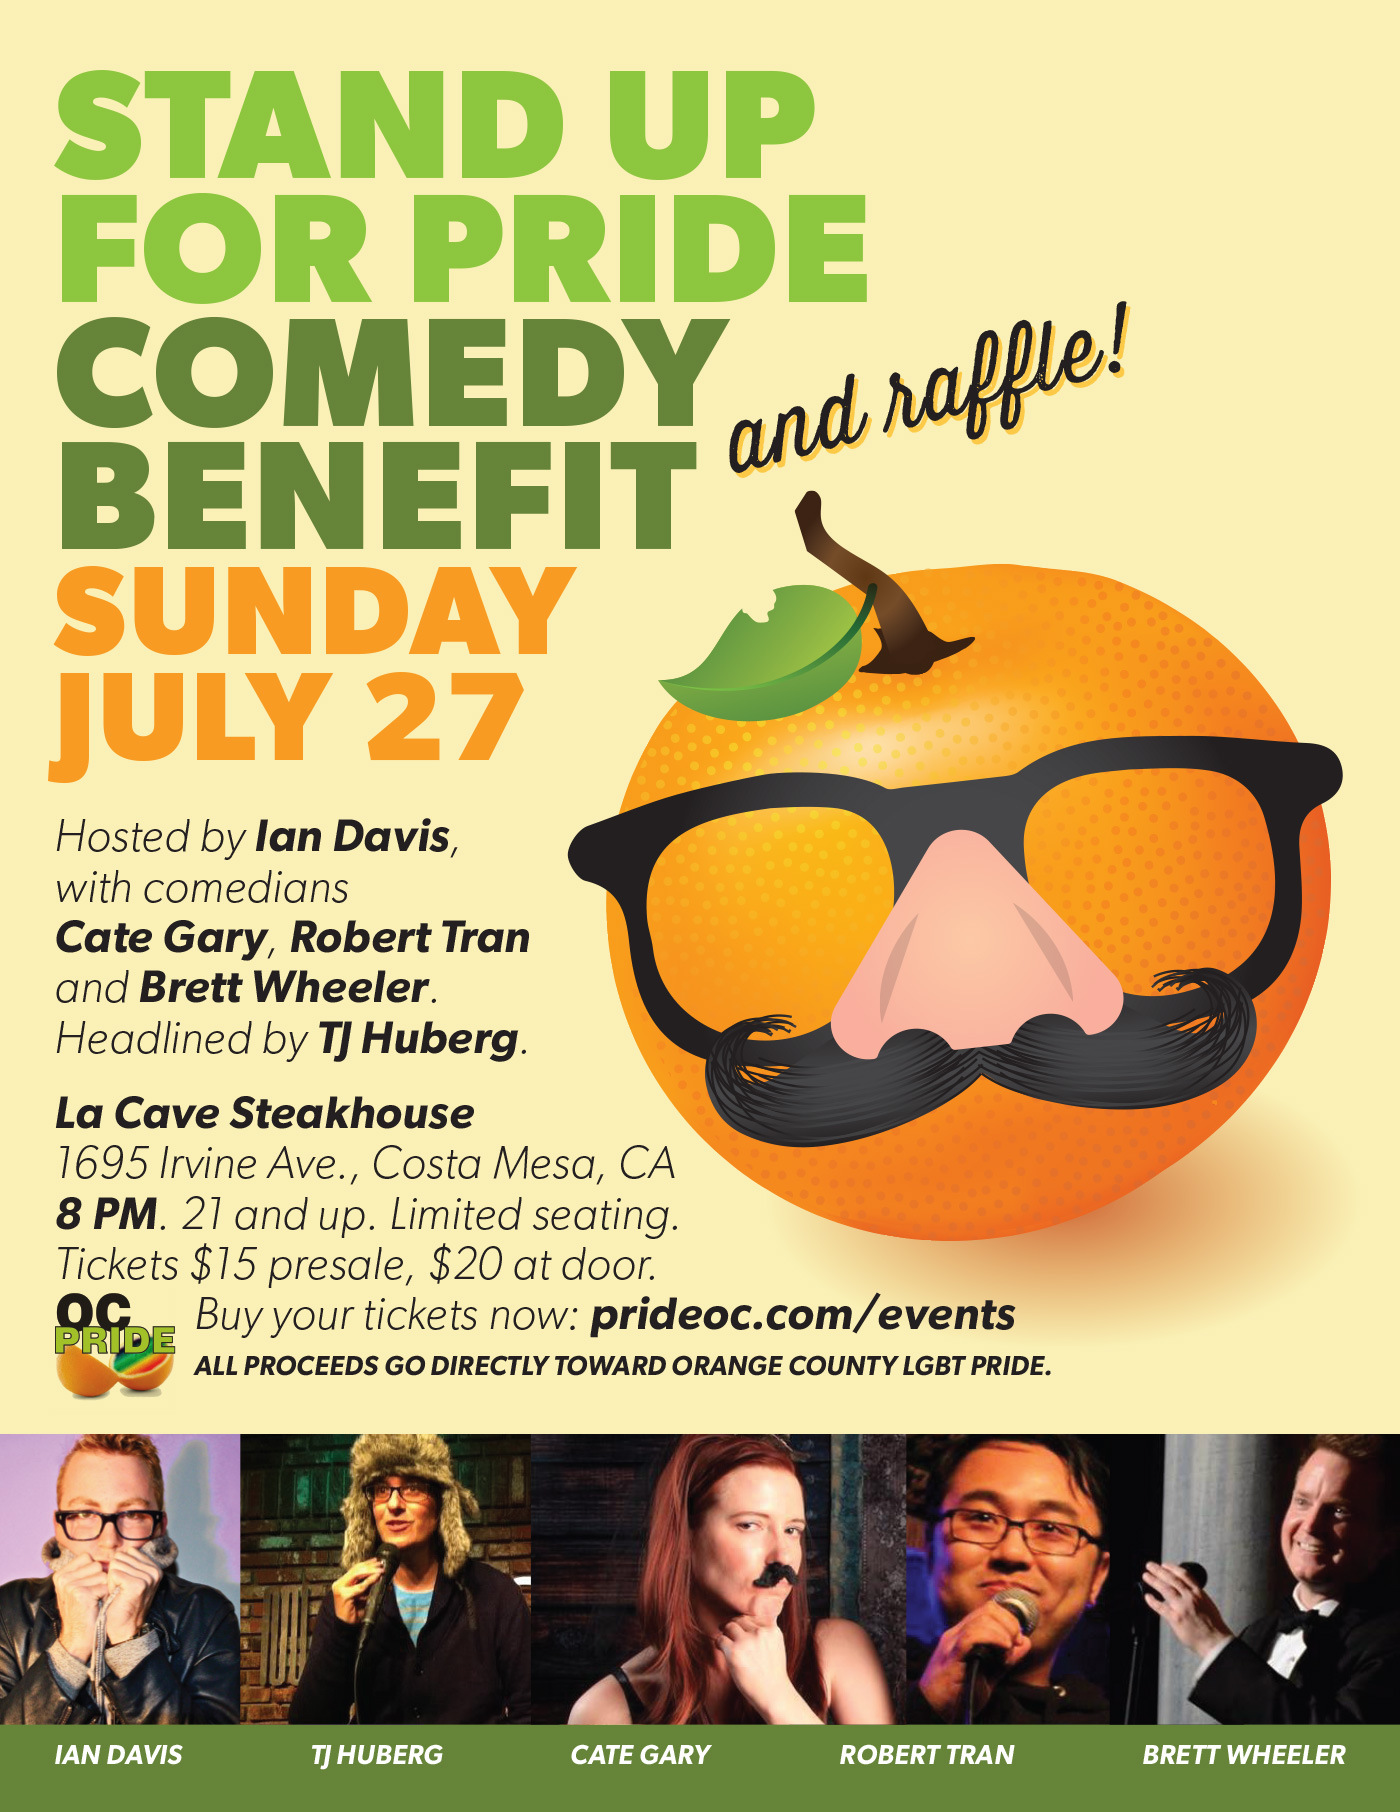 Image: Comedy Benefit Flyer